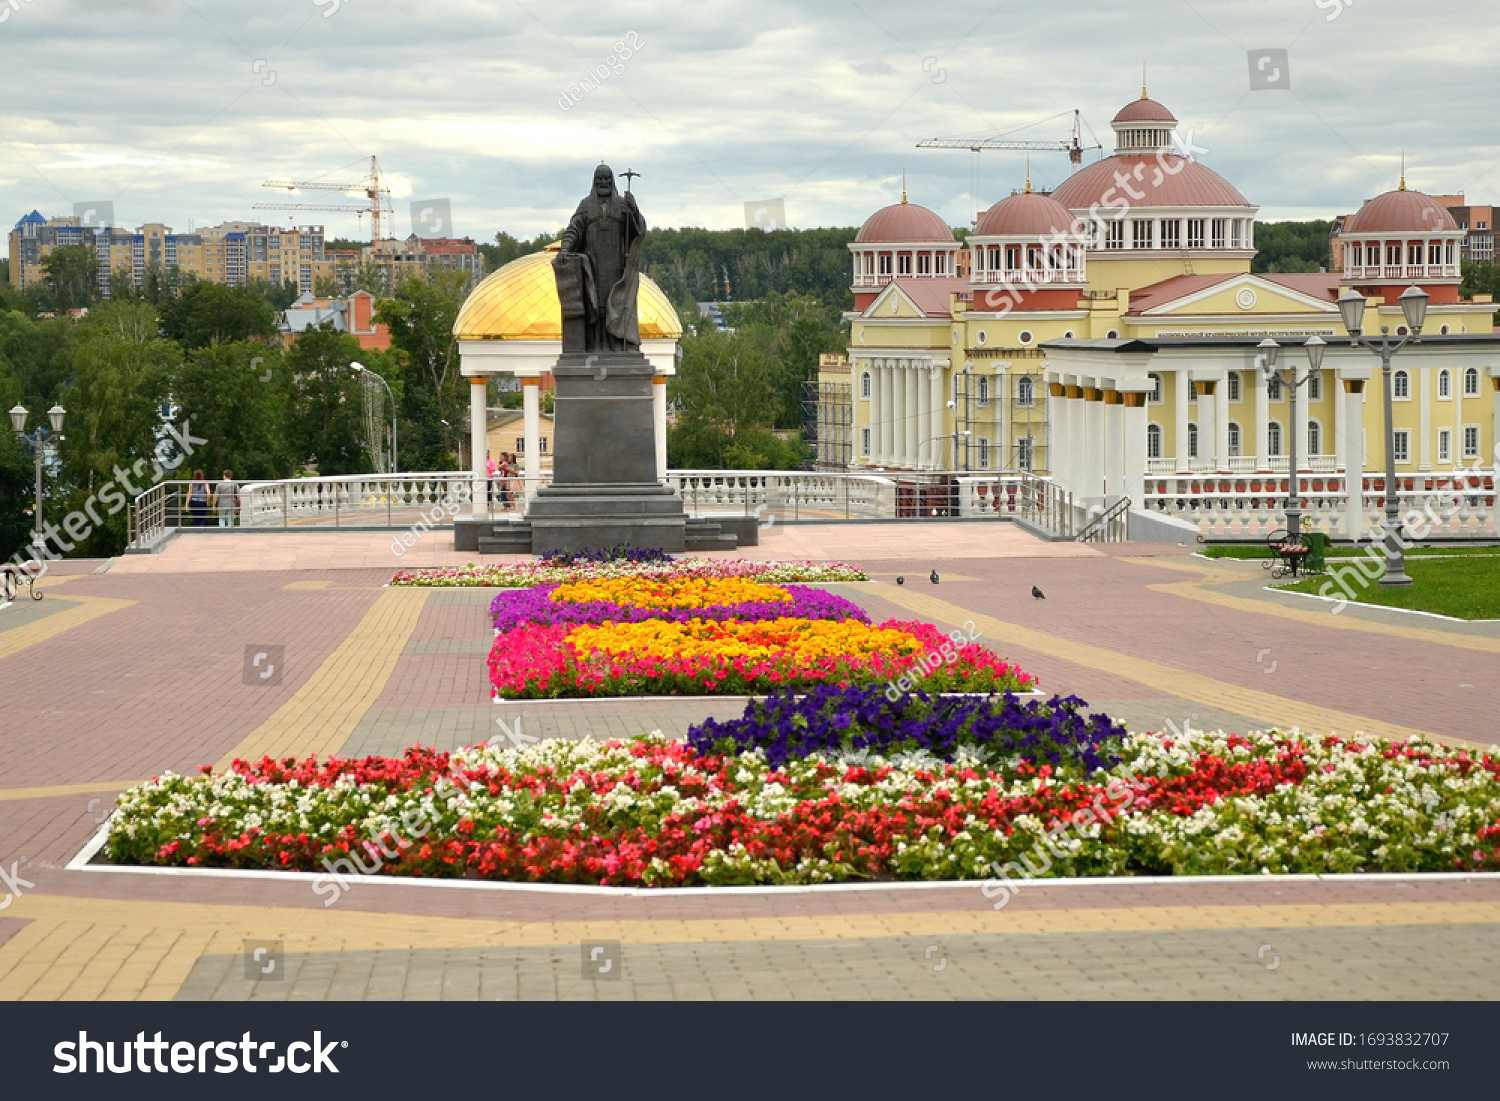 Sights of Saransk, a city in Russia, the capital of the Republic of Mordovia. #1693832707